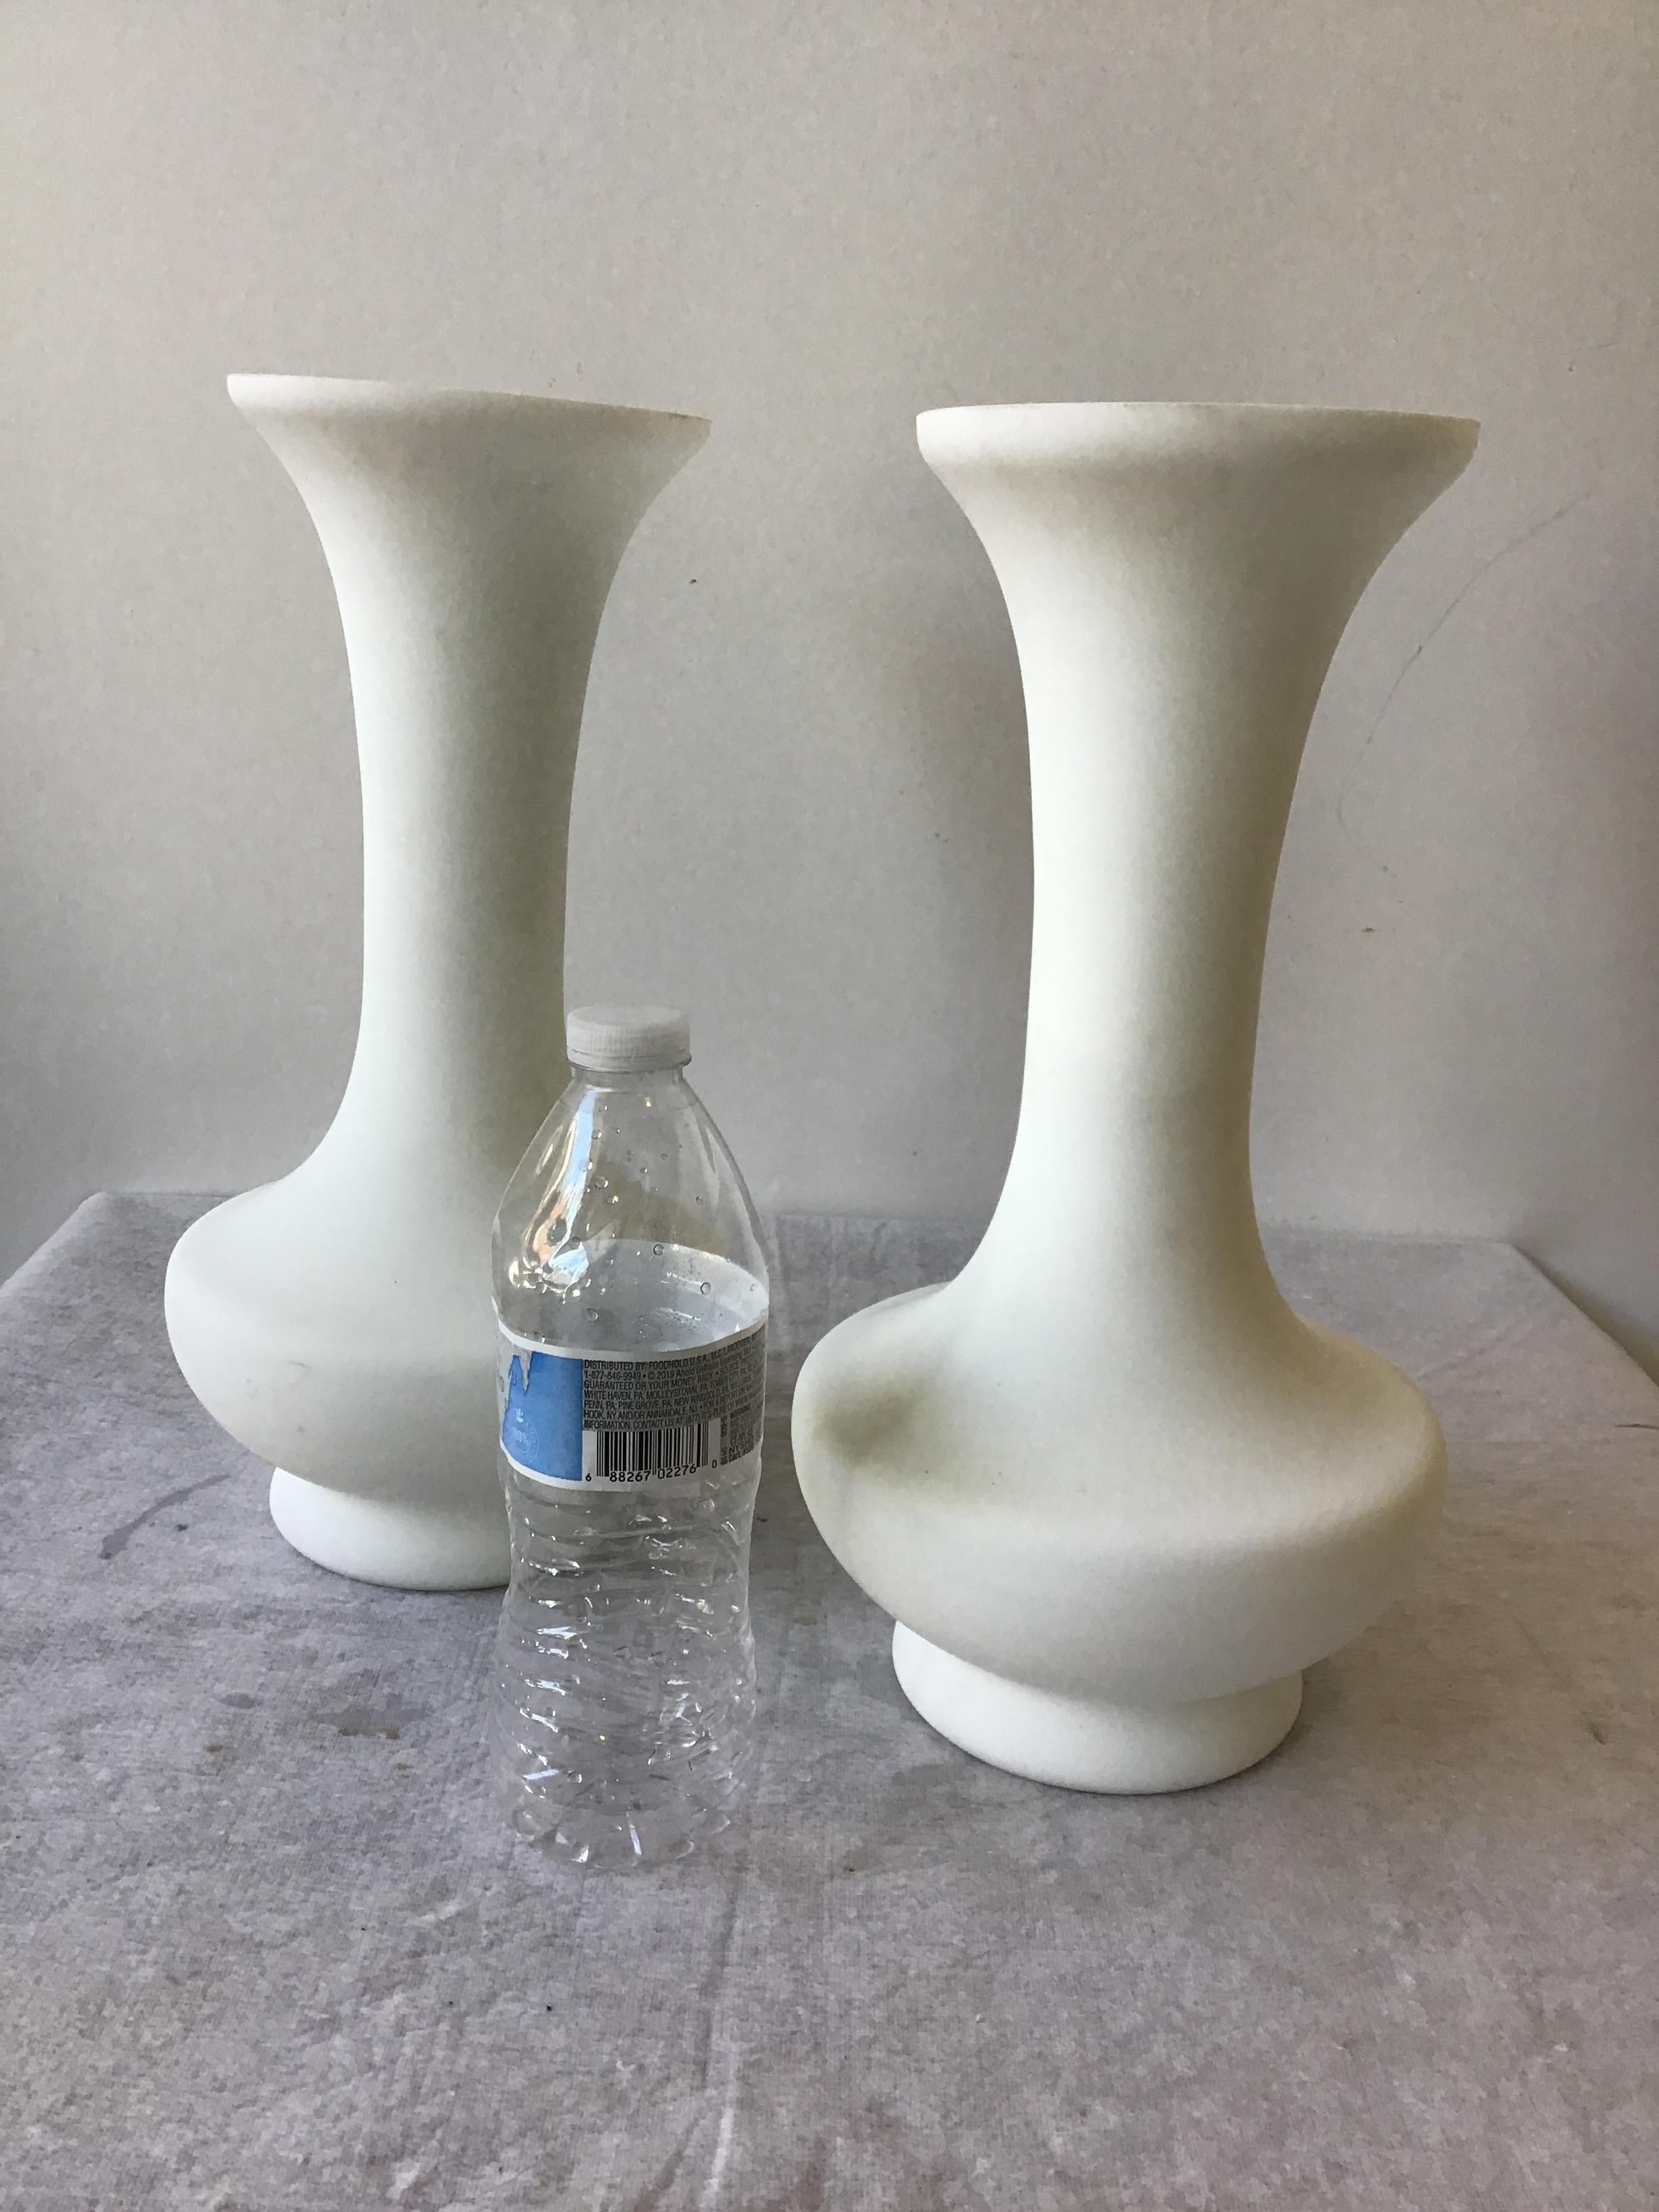 Pair of 1960s Italian, white frosted glass lamp bodies.
Lamps need all parts in order to be functioning lights.